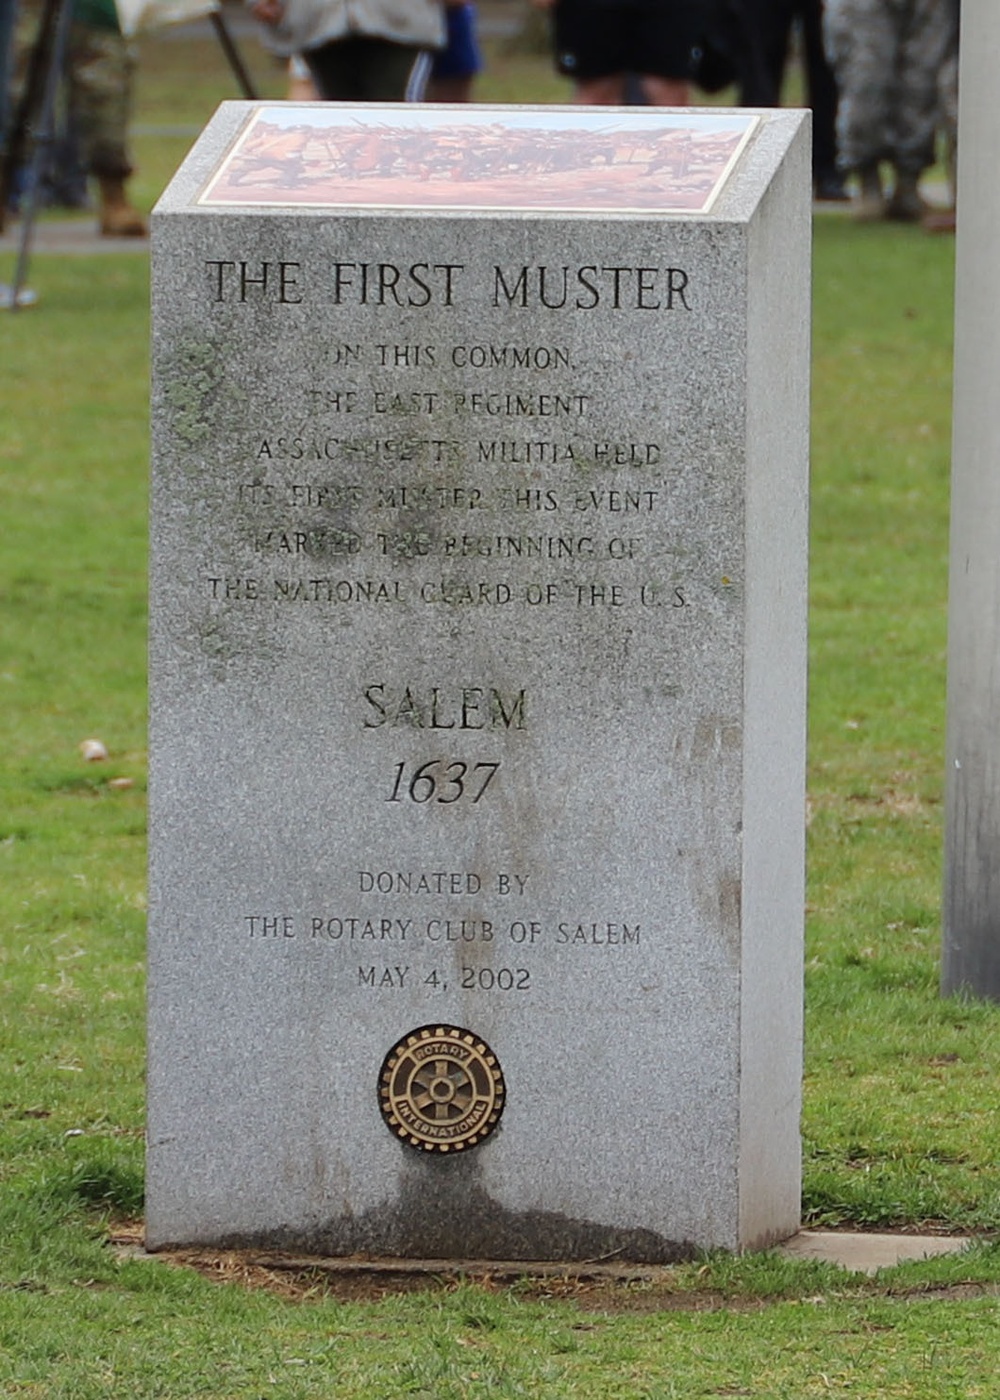 The First Muster